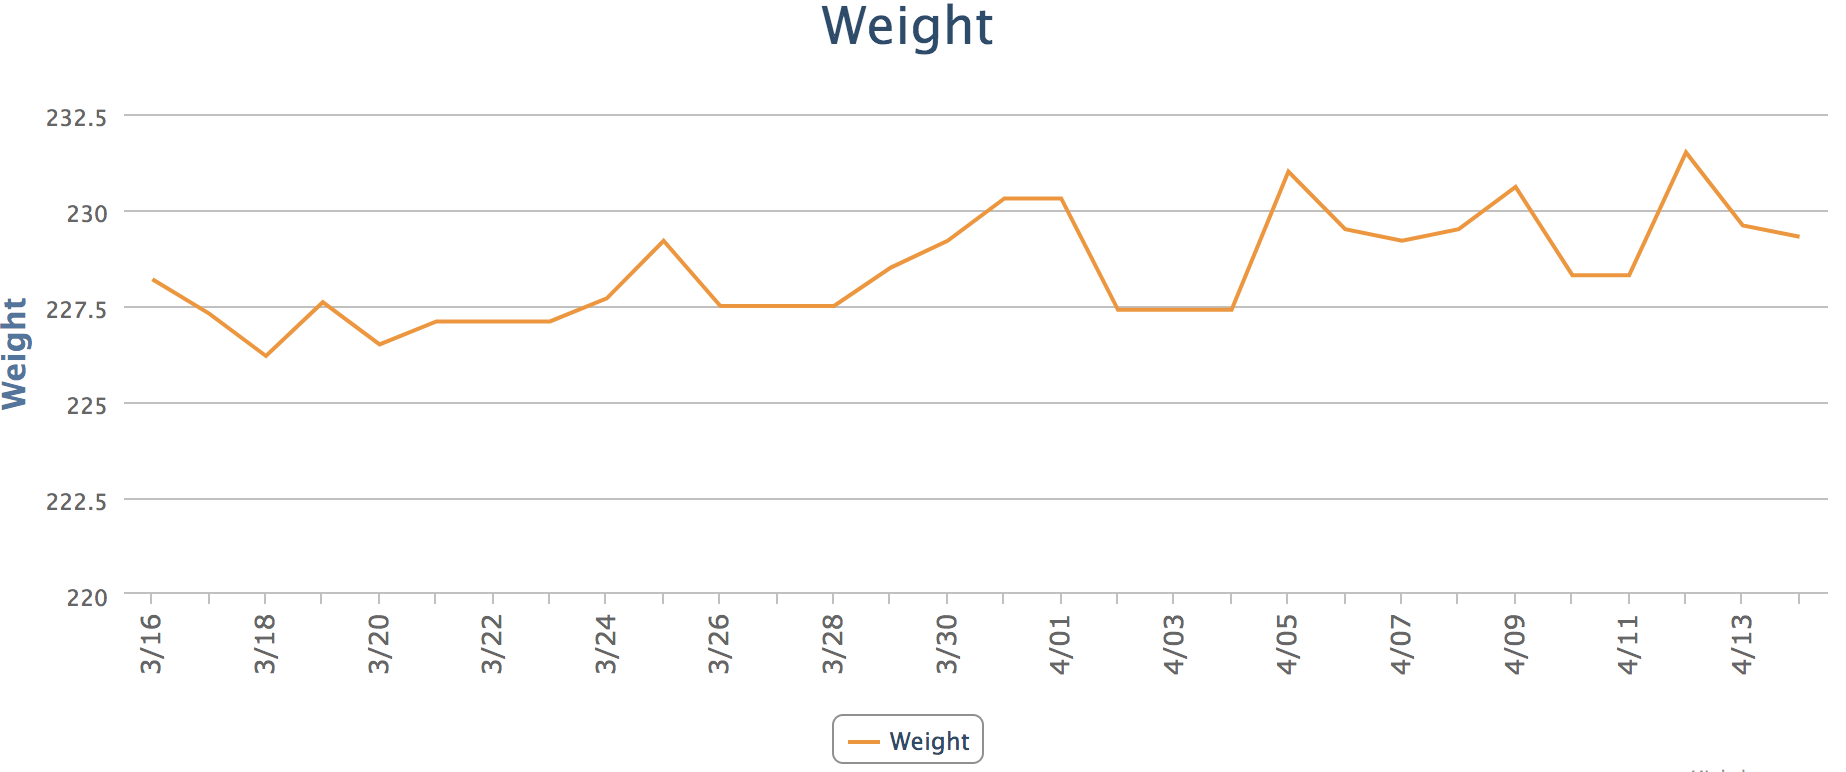 Weight over first month of quarantine